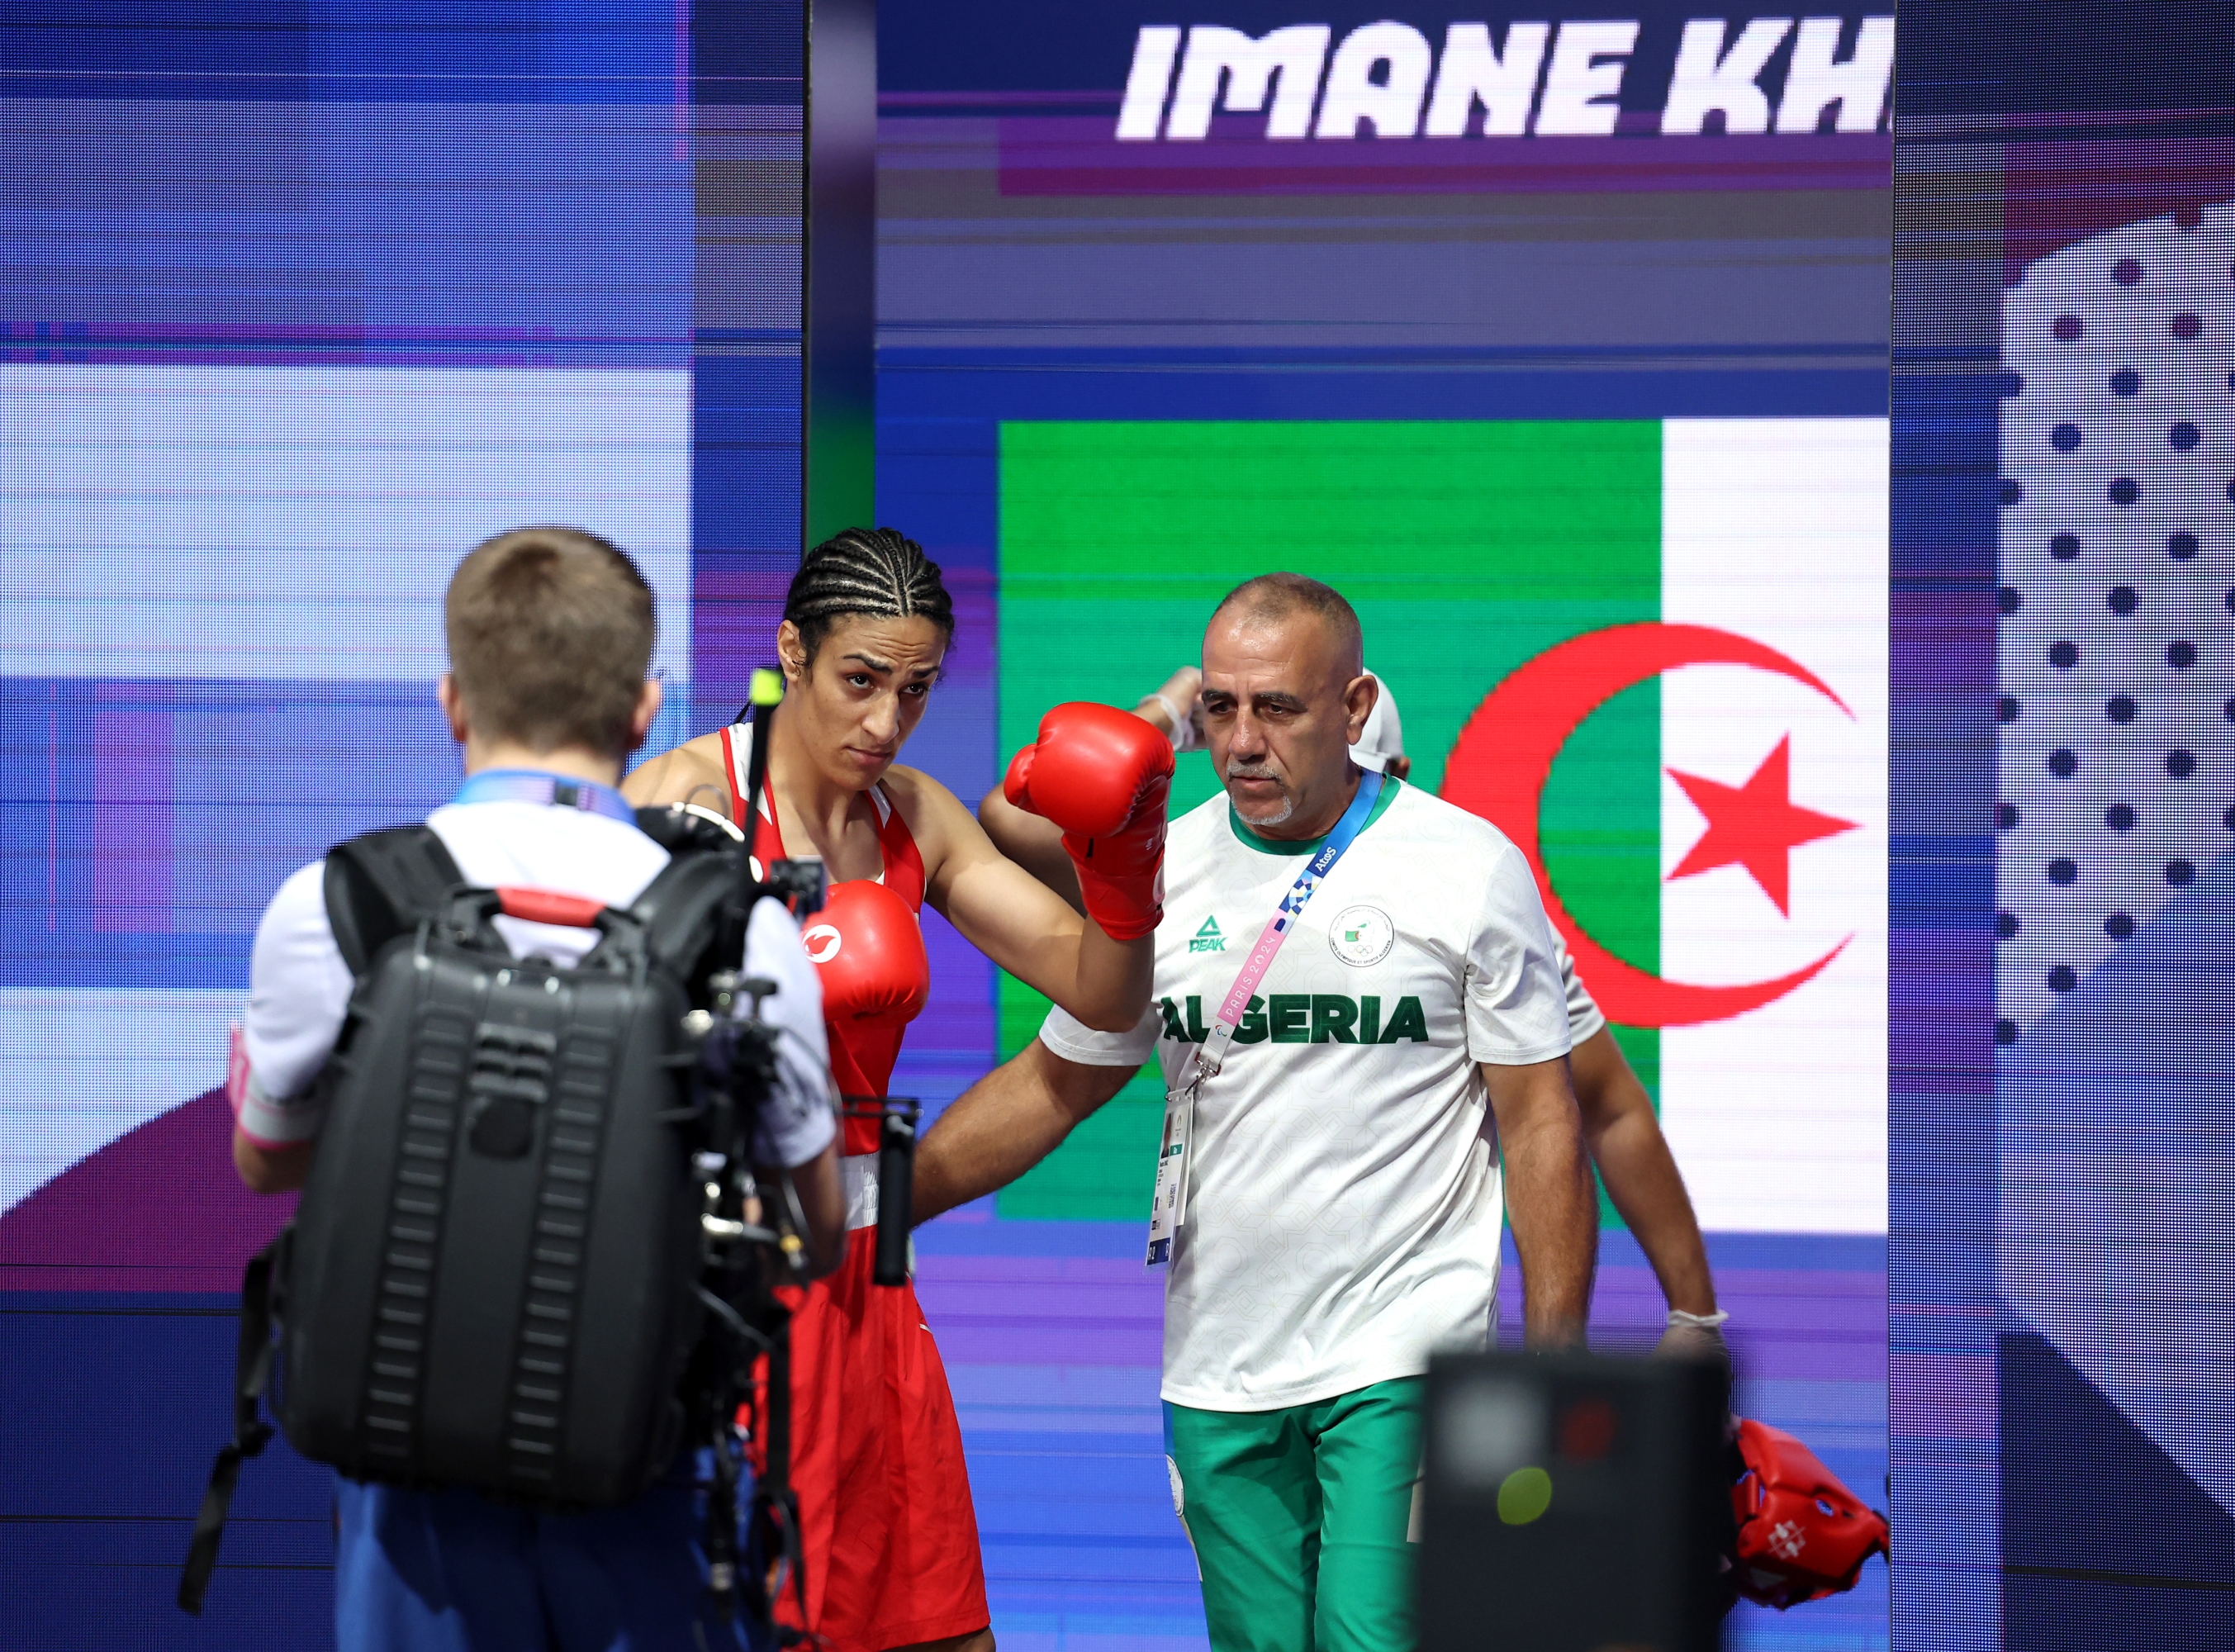 PARIS, FRANCE - AUGUST 01: Imane Khelif of Team Algeria makes her way to the ring with Team Algeria Coach Pedro Diaz prior to the Women's 66kg preliminary round match against Angela Carini of Team Italy on day six of the Olympic Games Paris 2024 at North Paris Arena on August 01, 2024 in Paris, France. (Photo by Richard Pelham/Getty Images) *** BESTPIX ***